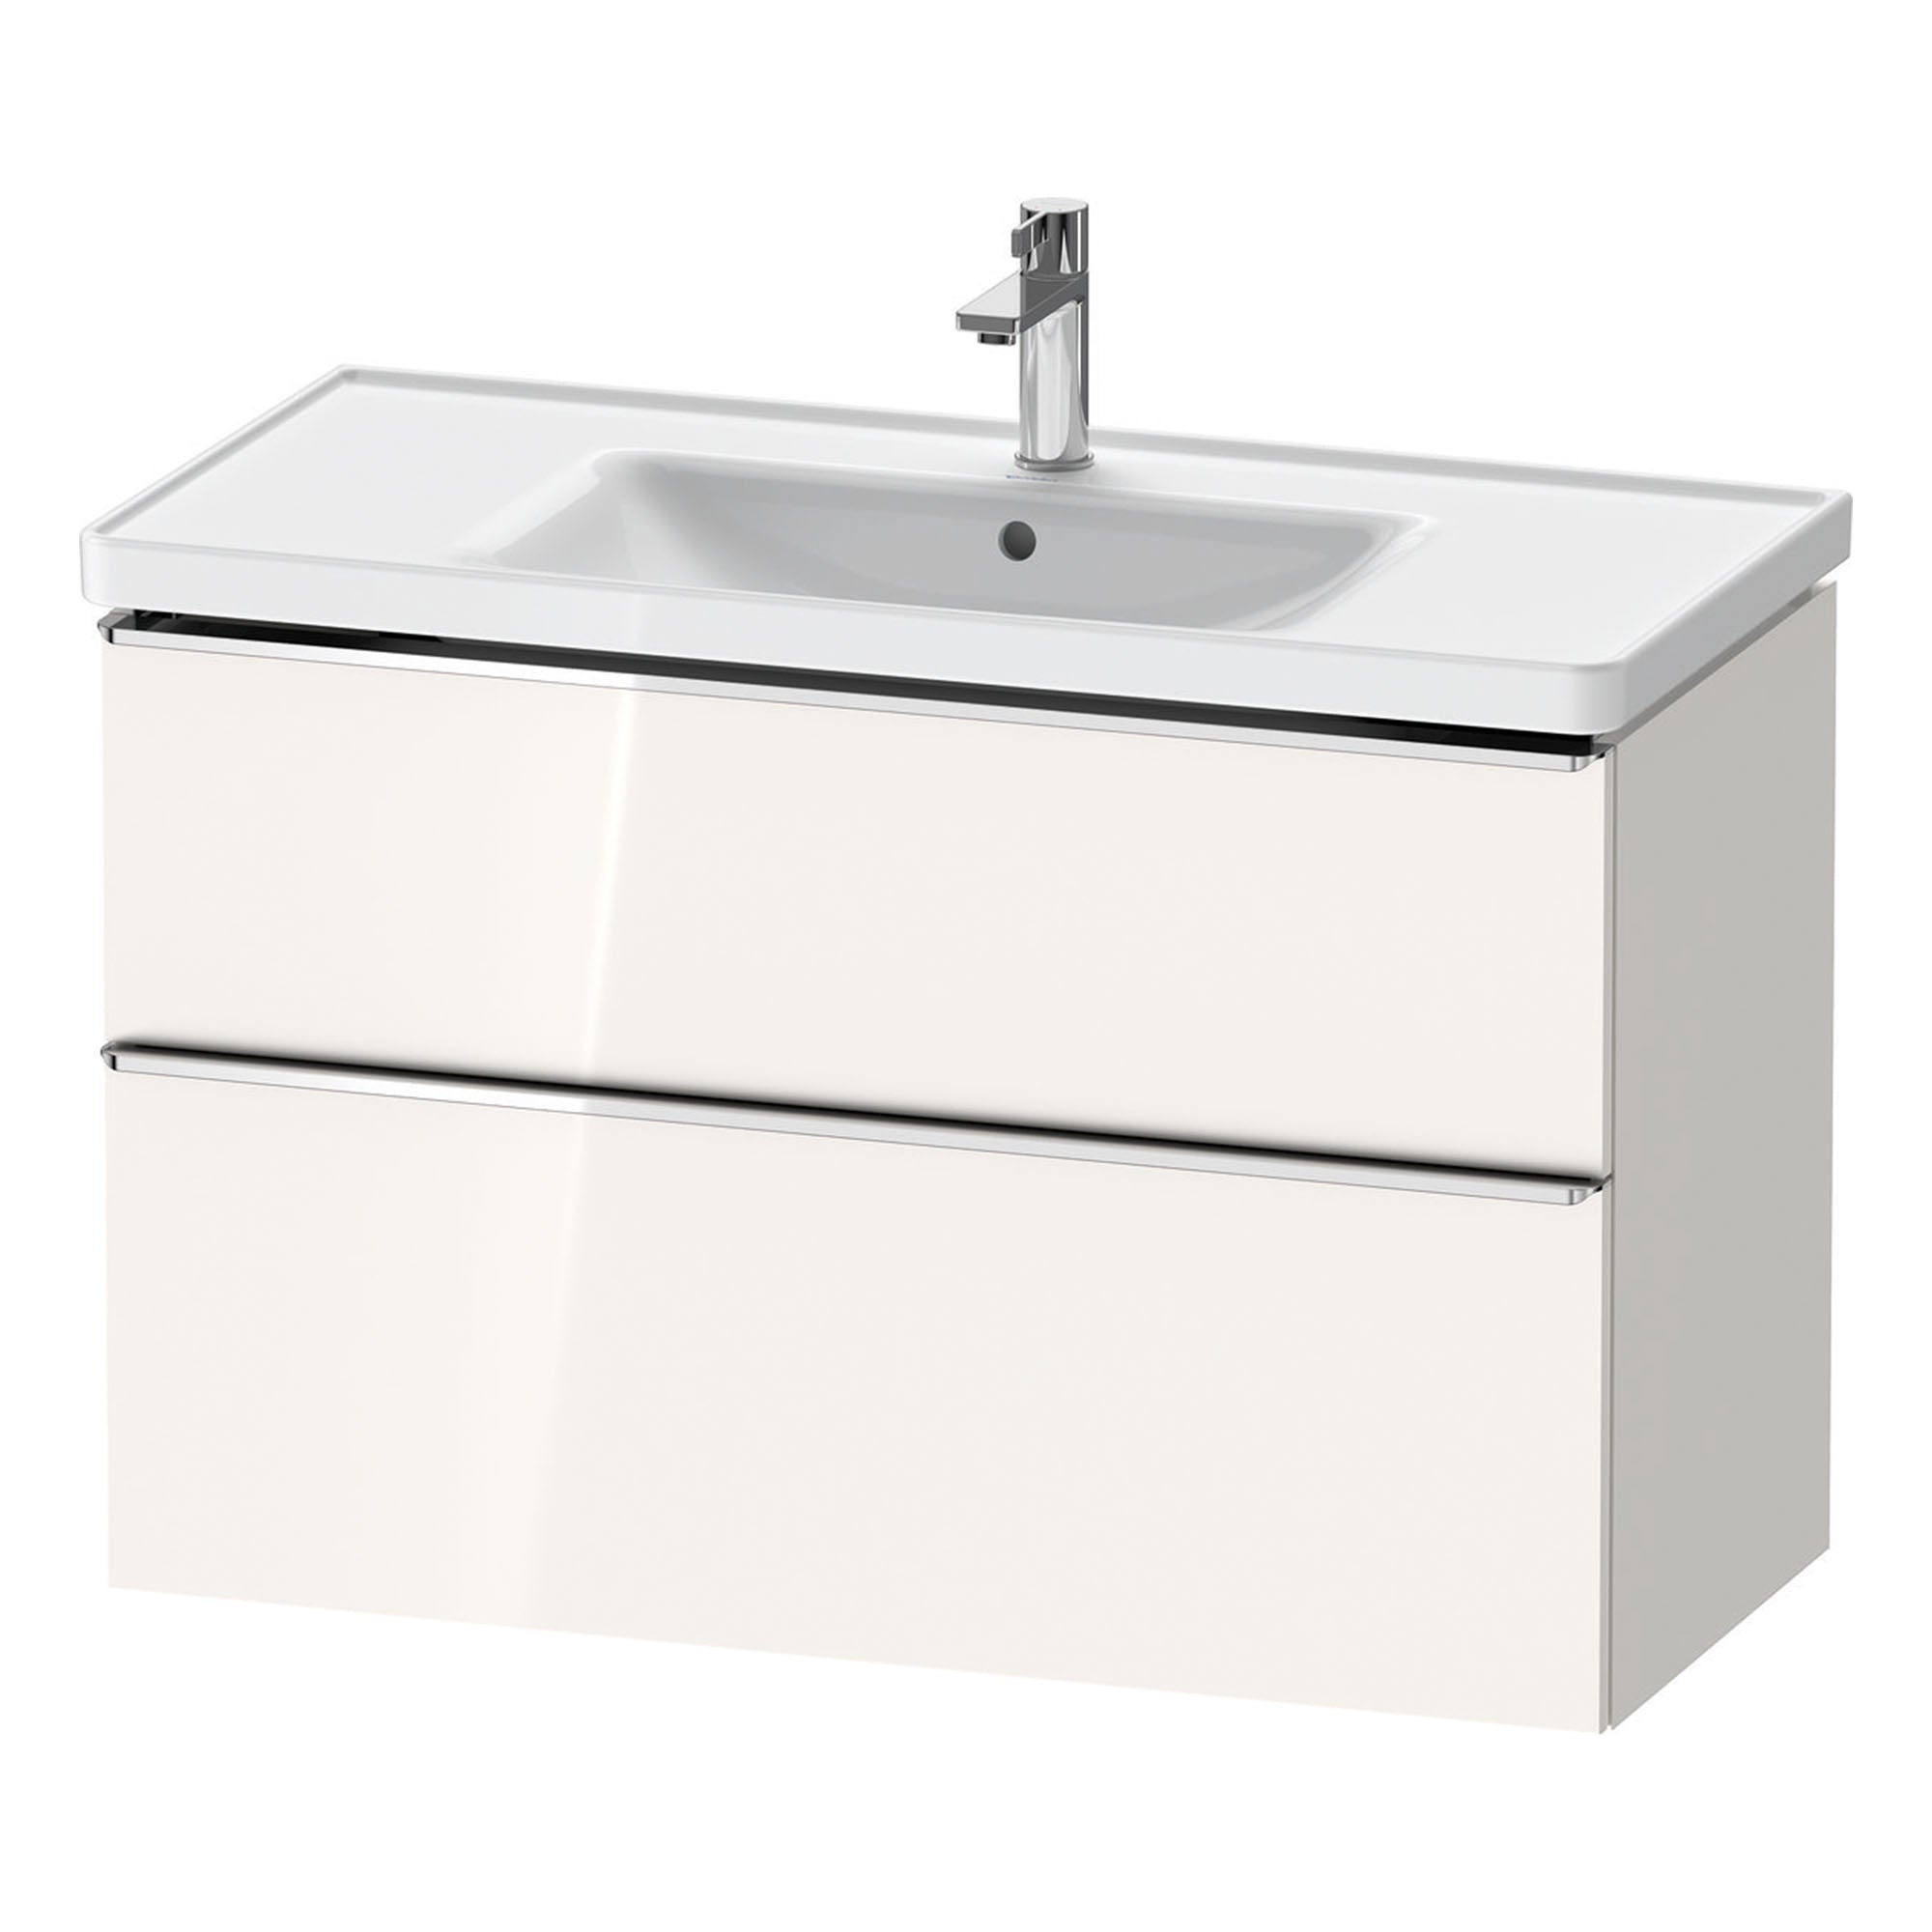 duravit d-neo 1000mm wall mounted vanity unit with d-neo basin gloss white chrome handles